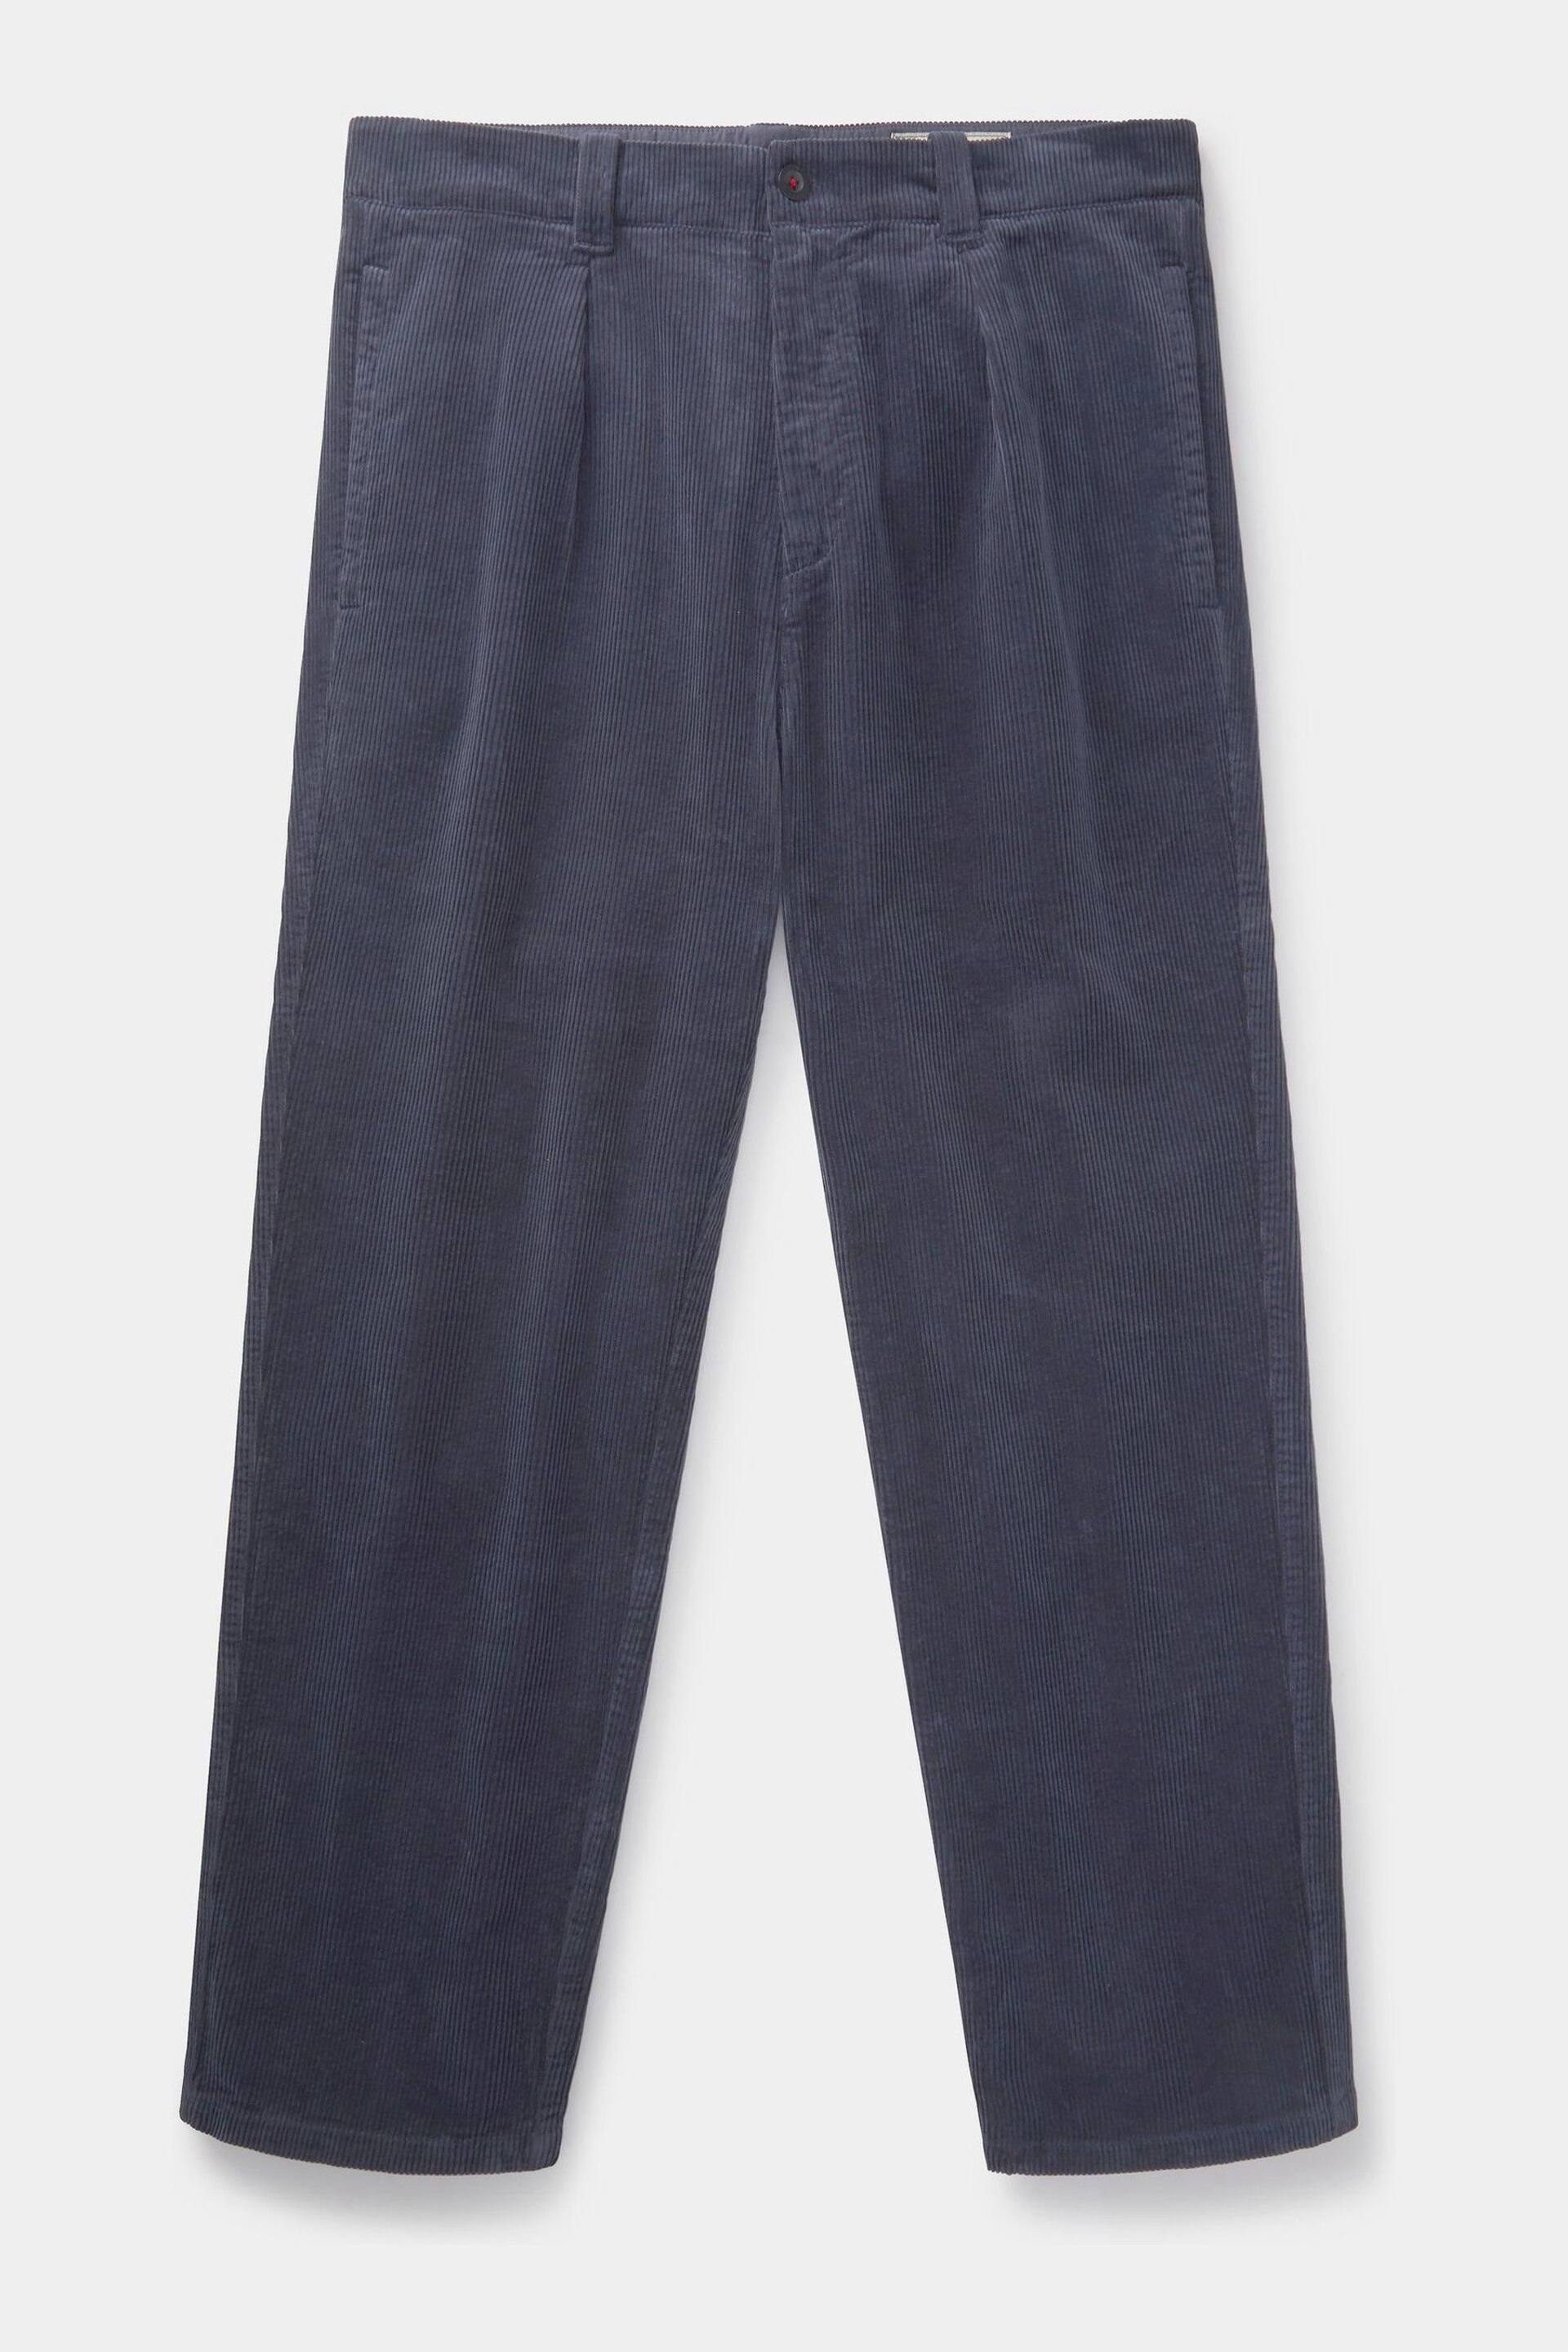 Aubin Barrowby Cord Trousers - Image 5 of 6